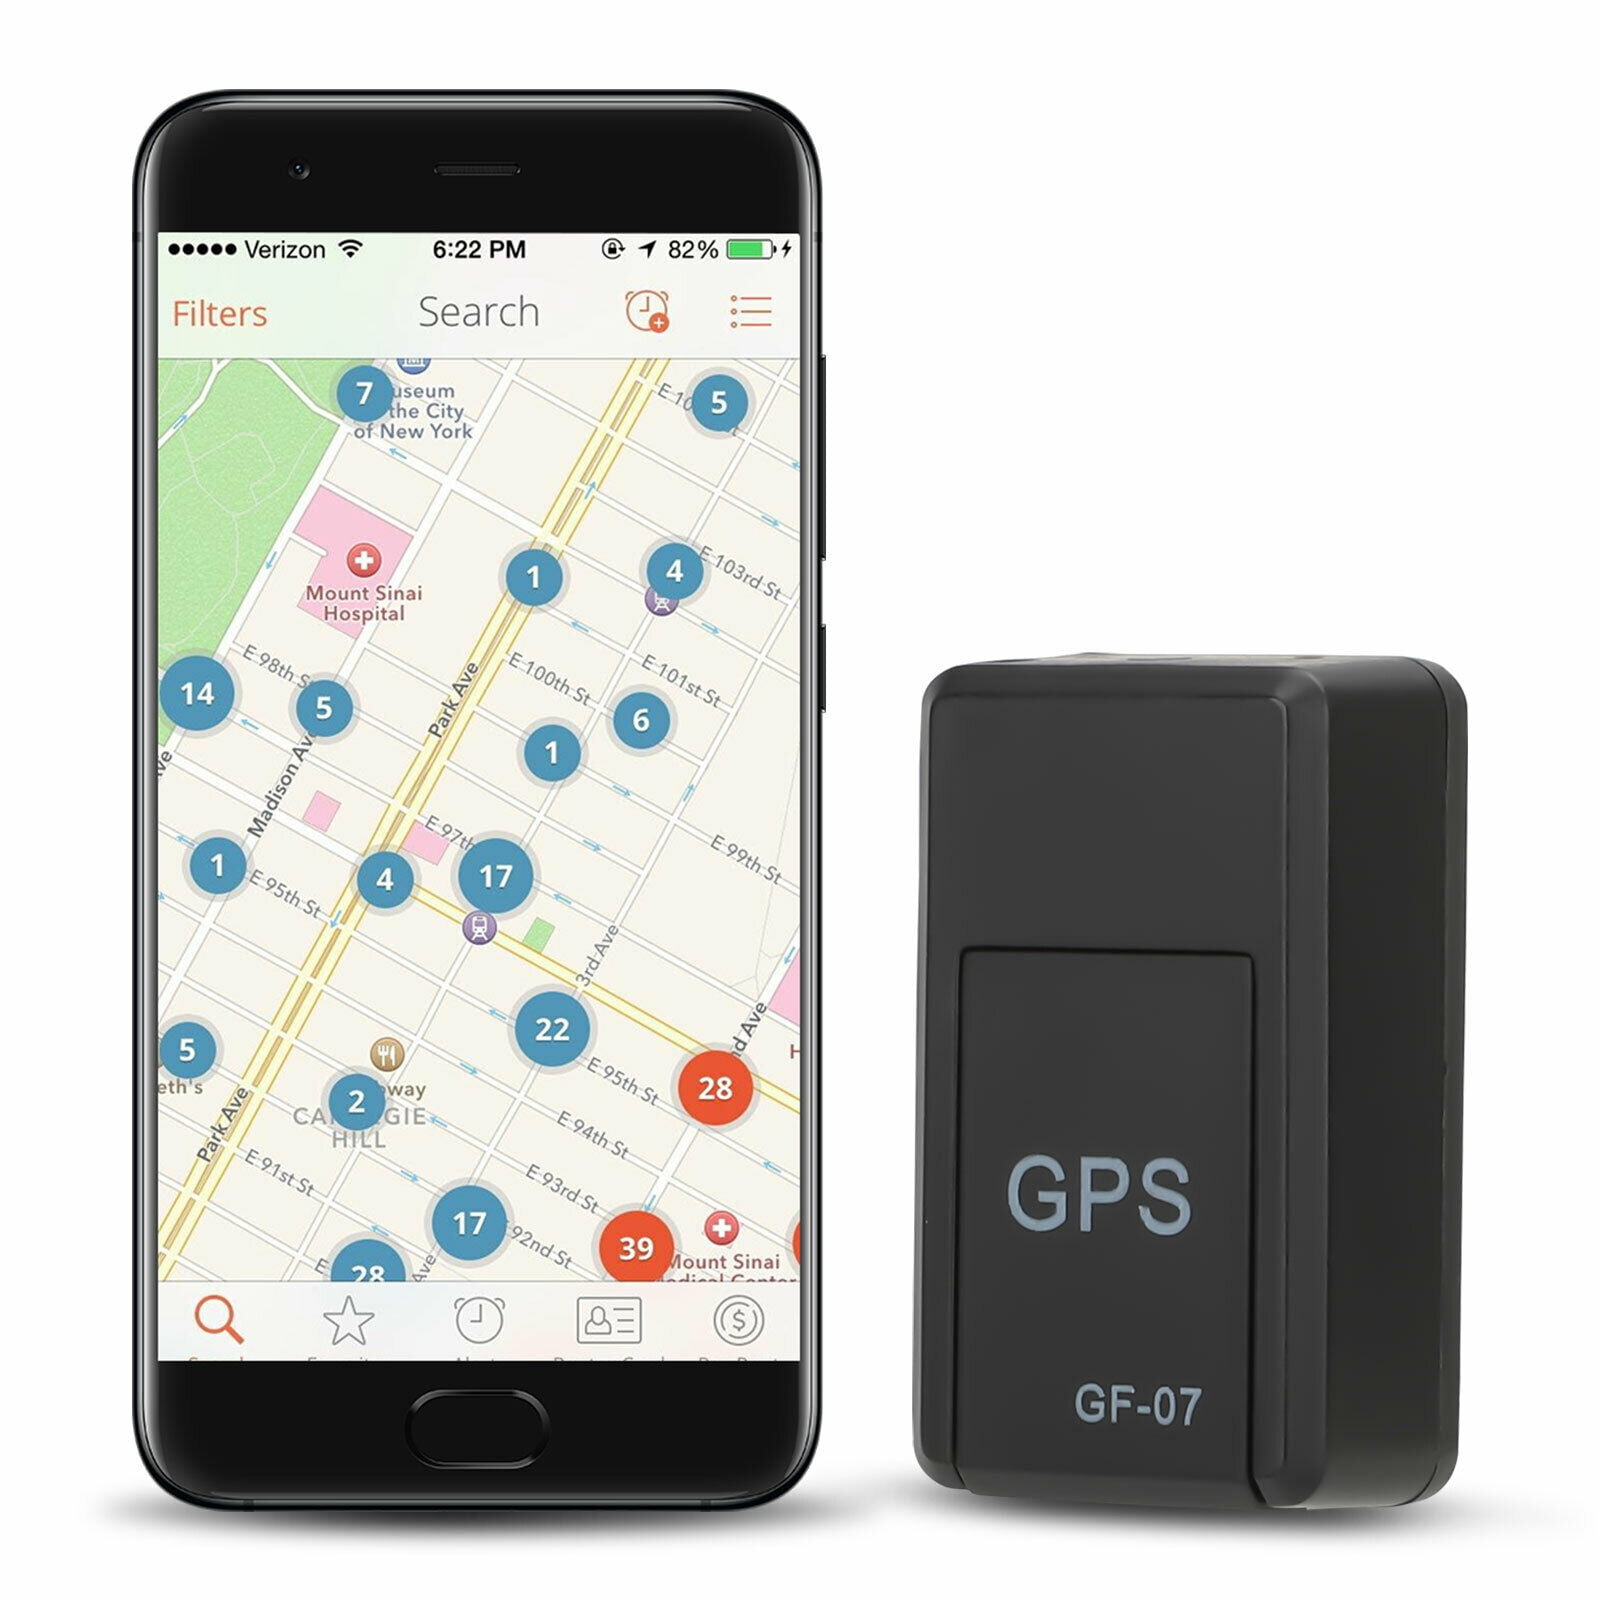 børn Uartig syg GPS Tracker with No Monthly Fee, Wireless Mini Portable Magnetic Tracker  Hidden for Vehicle Anti-Theft / Teen Driving - Walmart.com